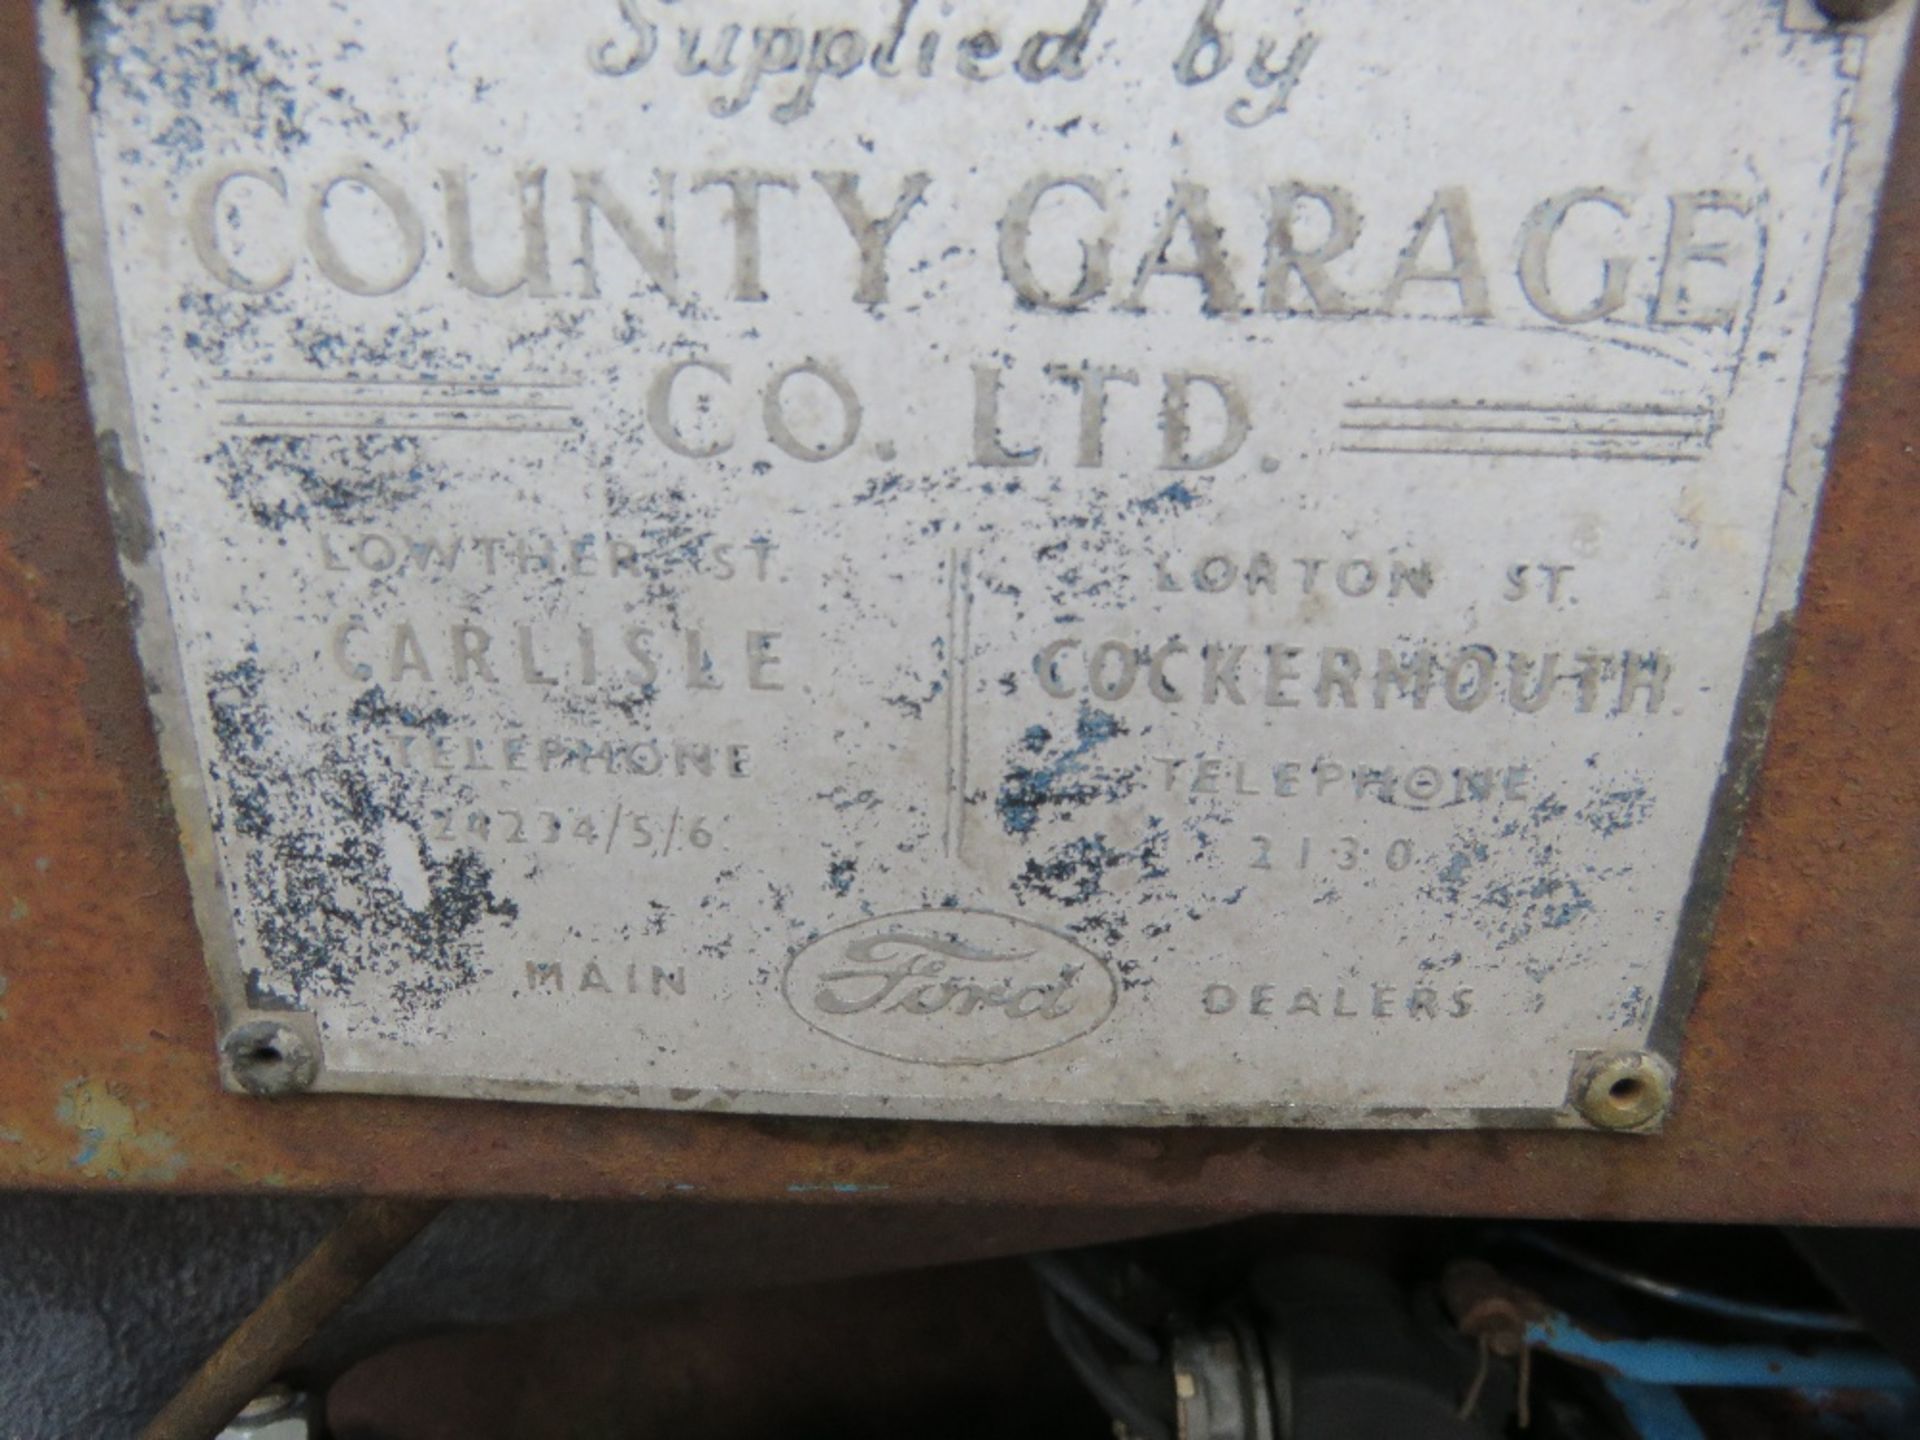 FORDSON MAJOR TRACTOR, ORIGINALLY SUPPLIED BY COUNTY GARAGE CO LTD FROM CARLISLE. WHEN TESTED WAS S - Image 7 of 9